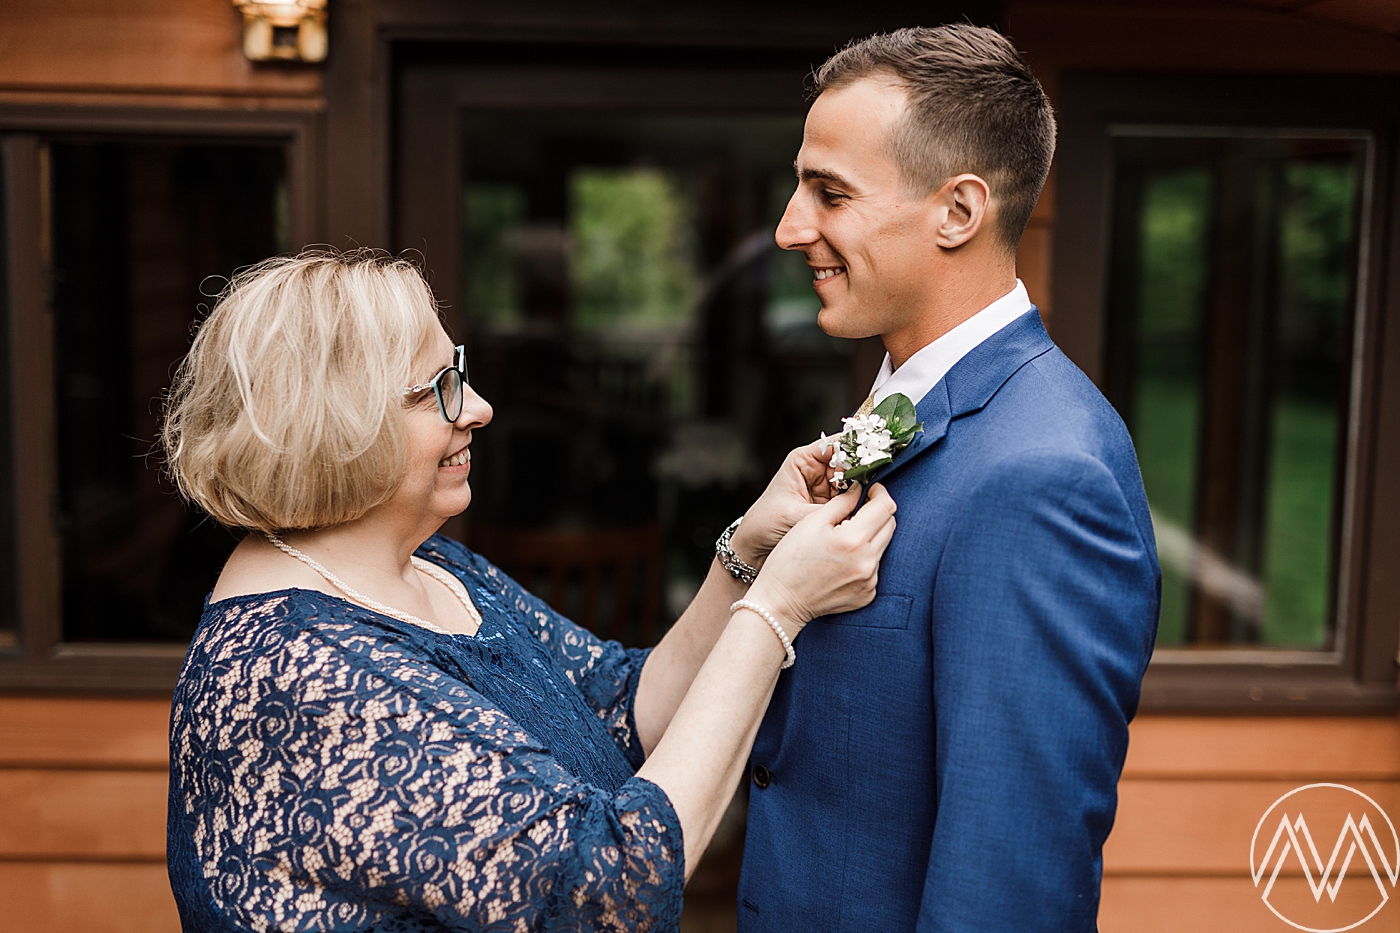 Groom + Mother getting ready before intimate elopement ceremony at Mt. Rainier. Photographed by Megan Montalvo Photography. 